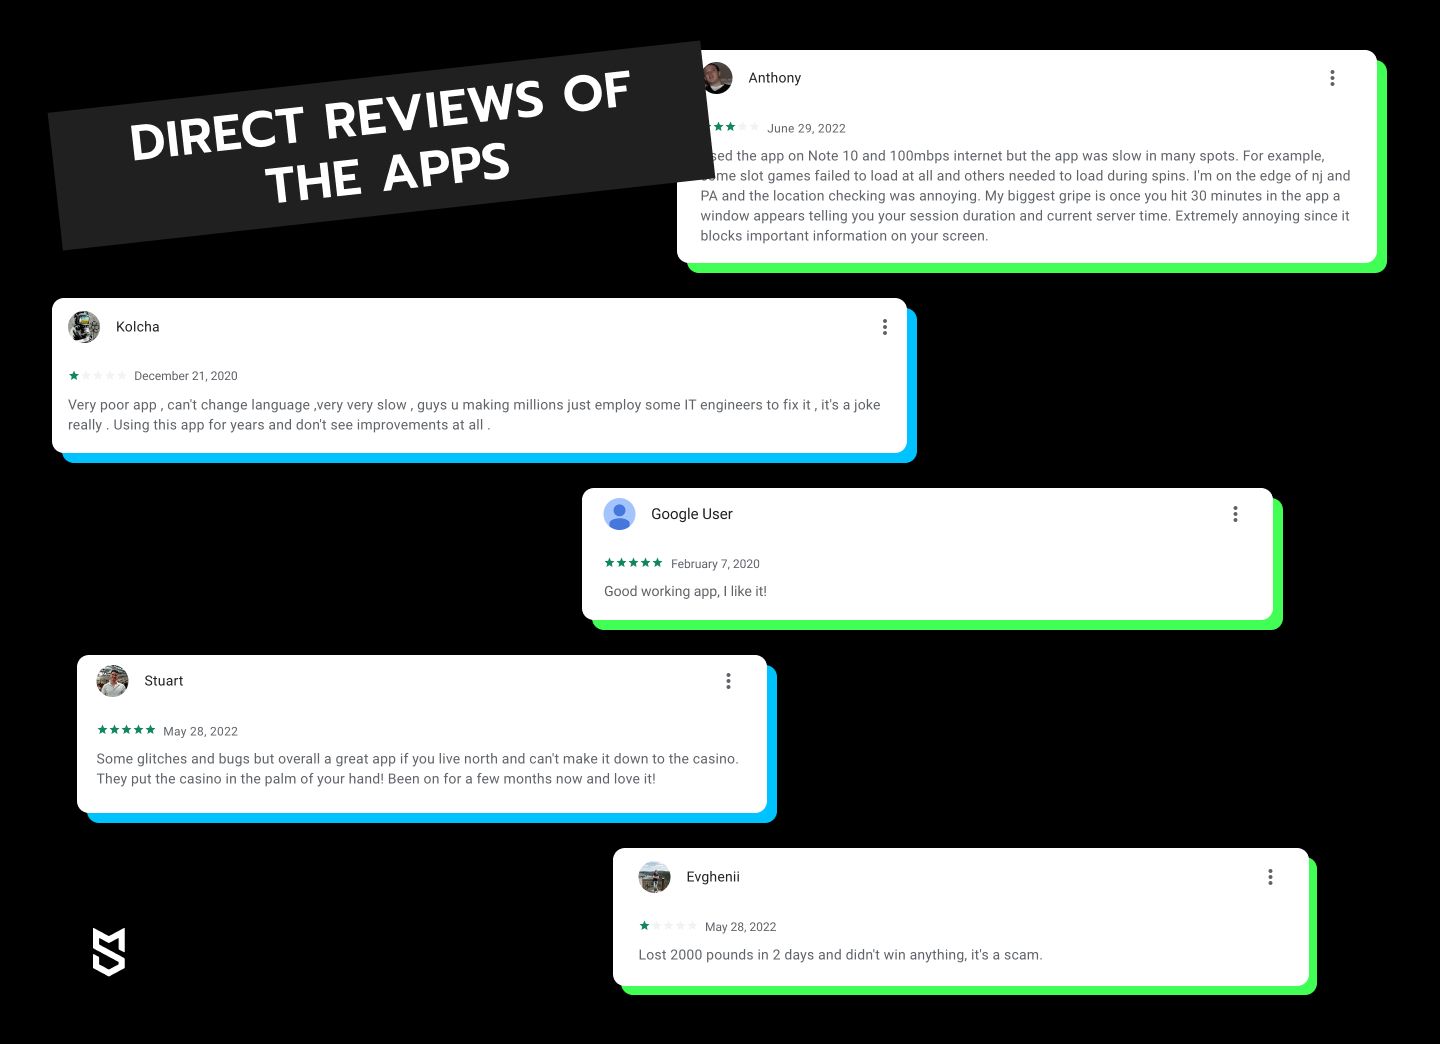 Direct reviews of the apps